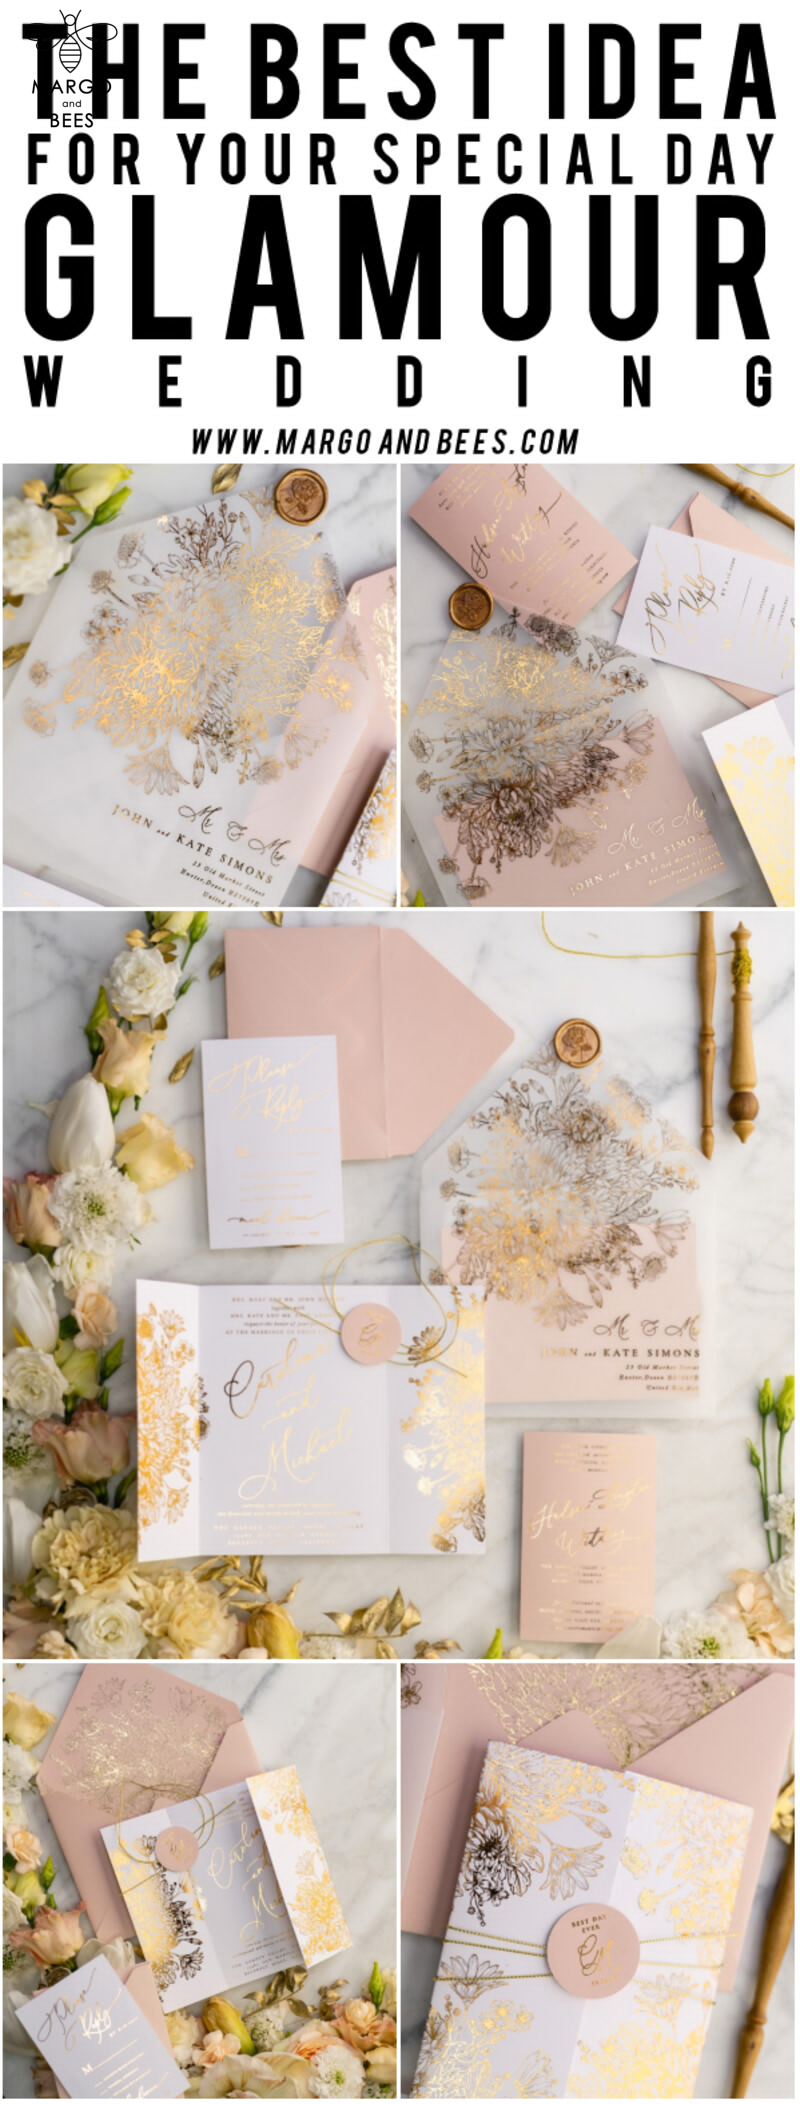 Exquisite Arabic Golden Wedding Invitations with Glamour Gold Foil and Romantic Blush Pink Touches: Bespoke Indian Wedding Stationery-42